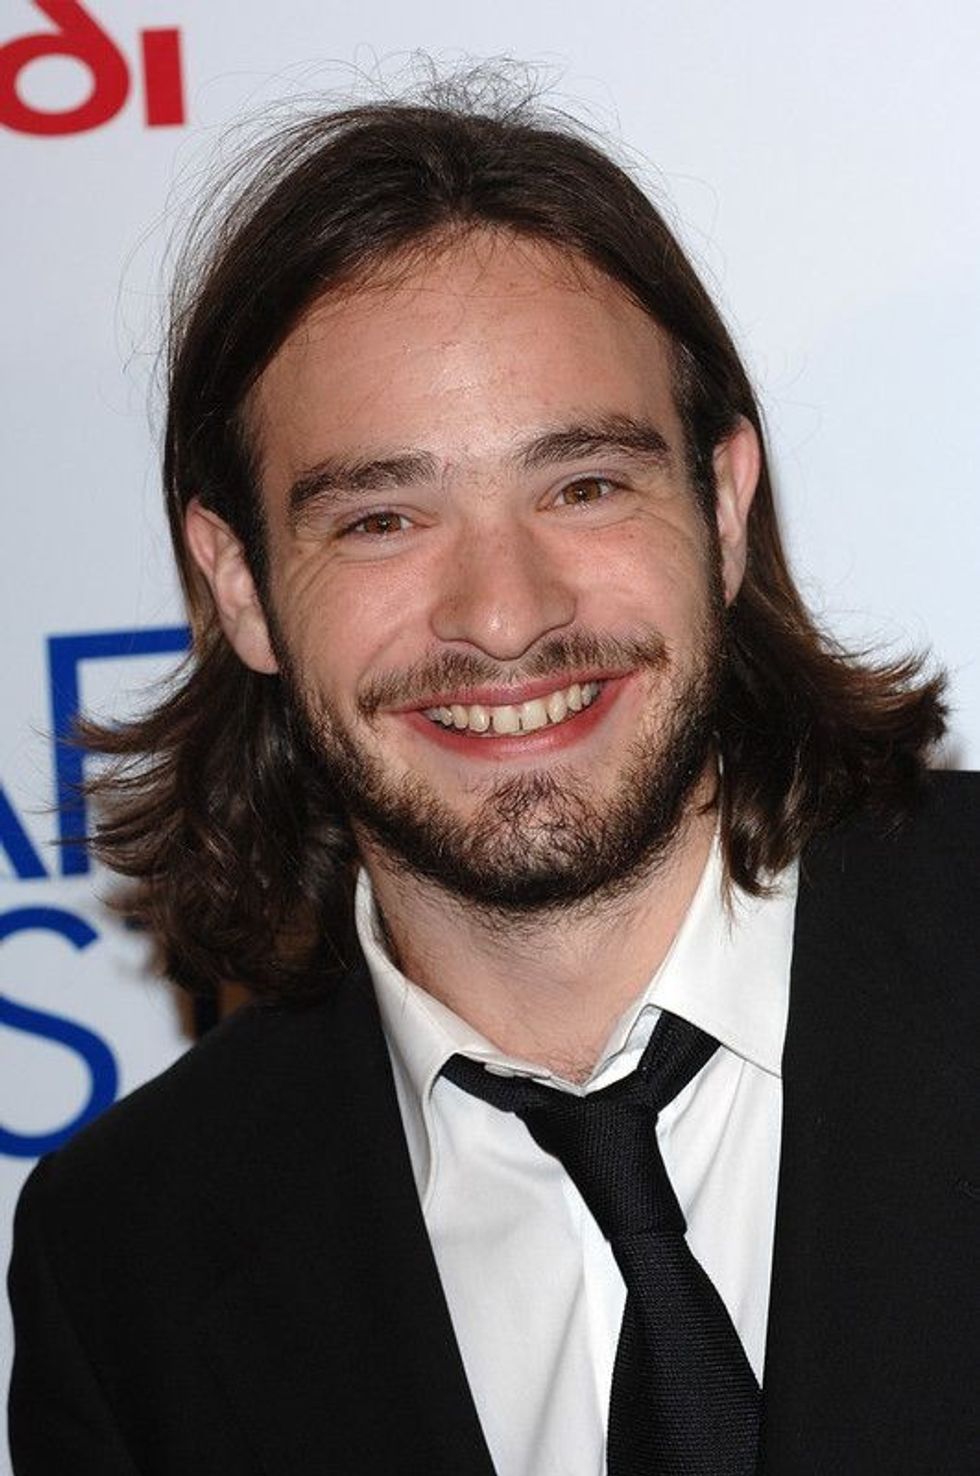 Actor Charlie Cox known for his character as Daredevil